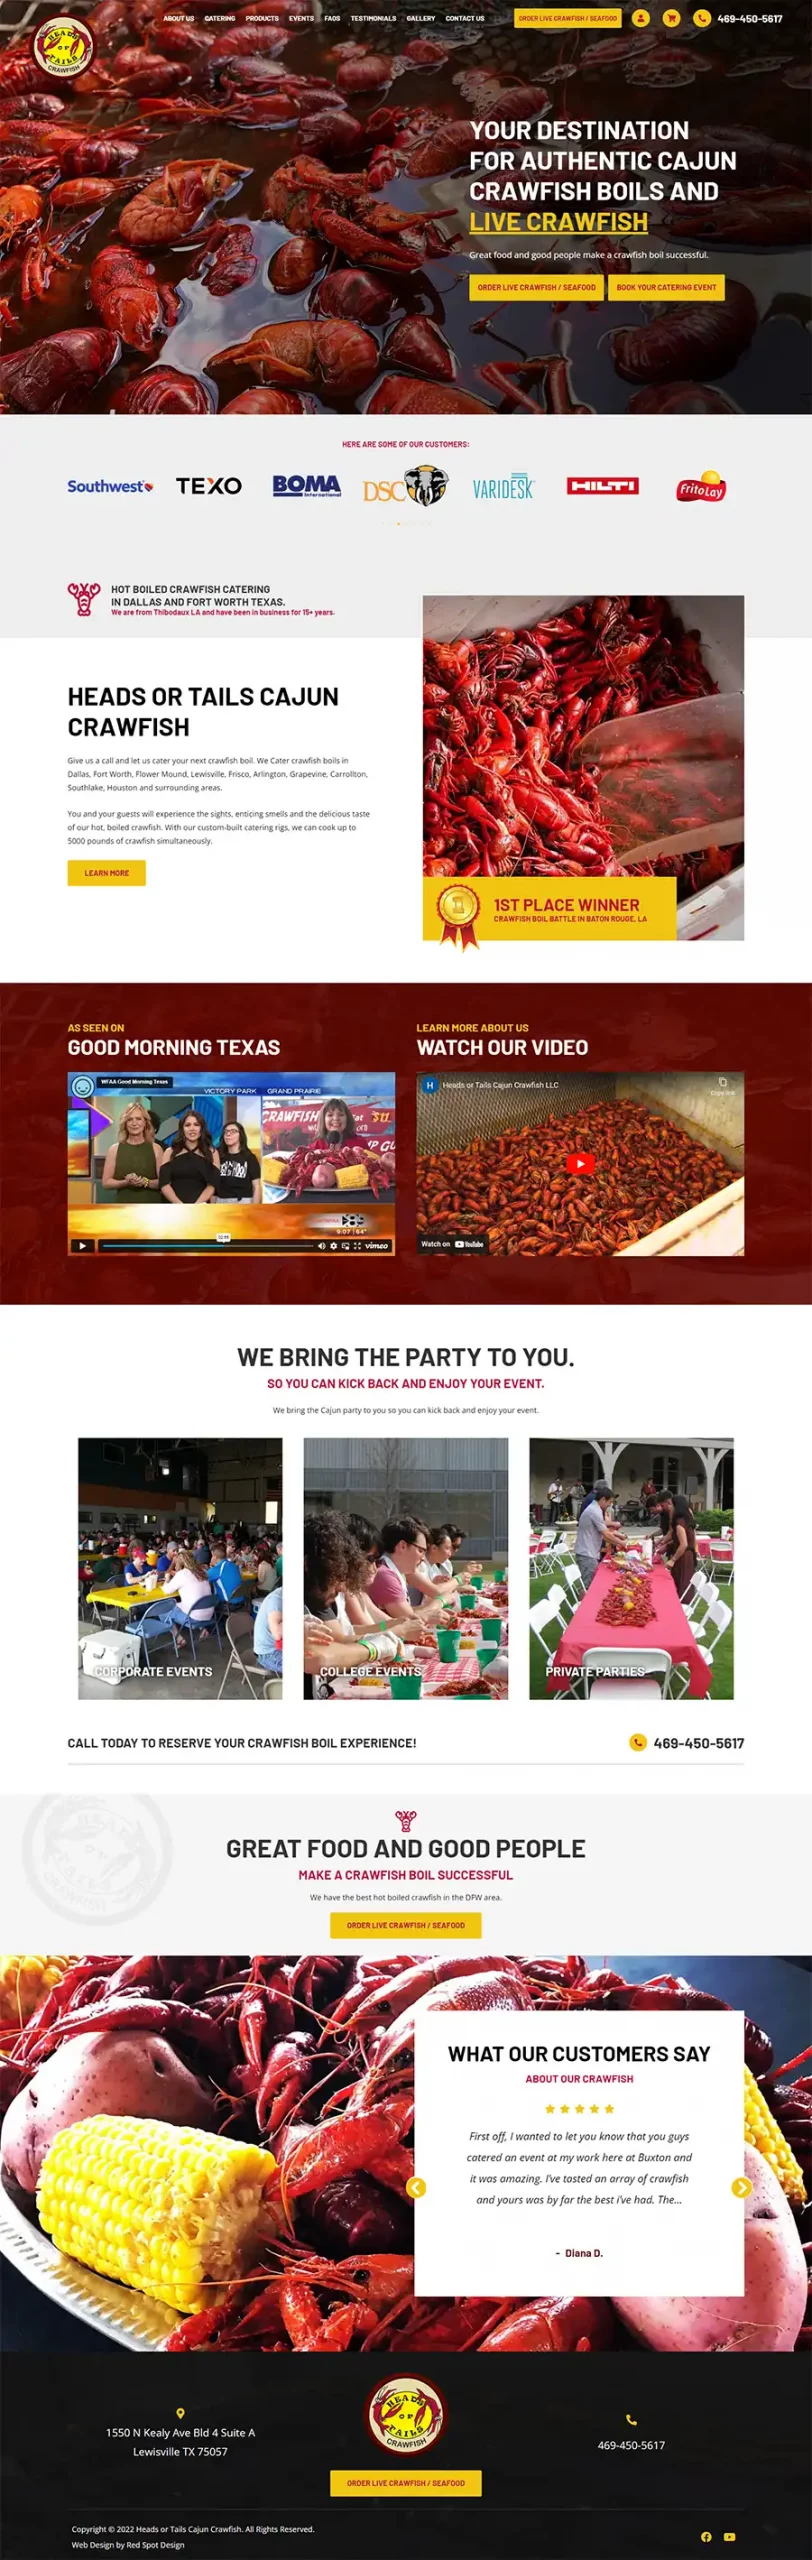 ecommerce website design for crawfish catering company in dallas